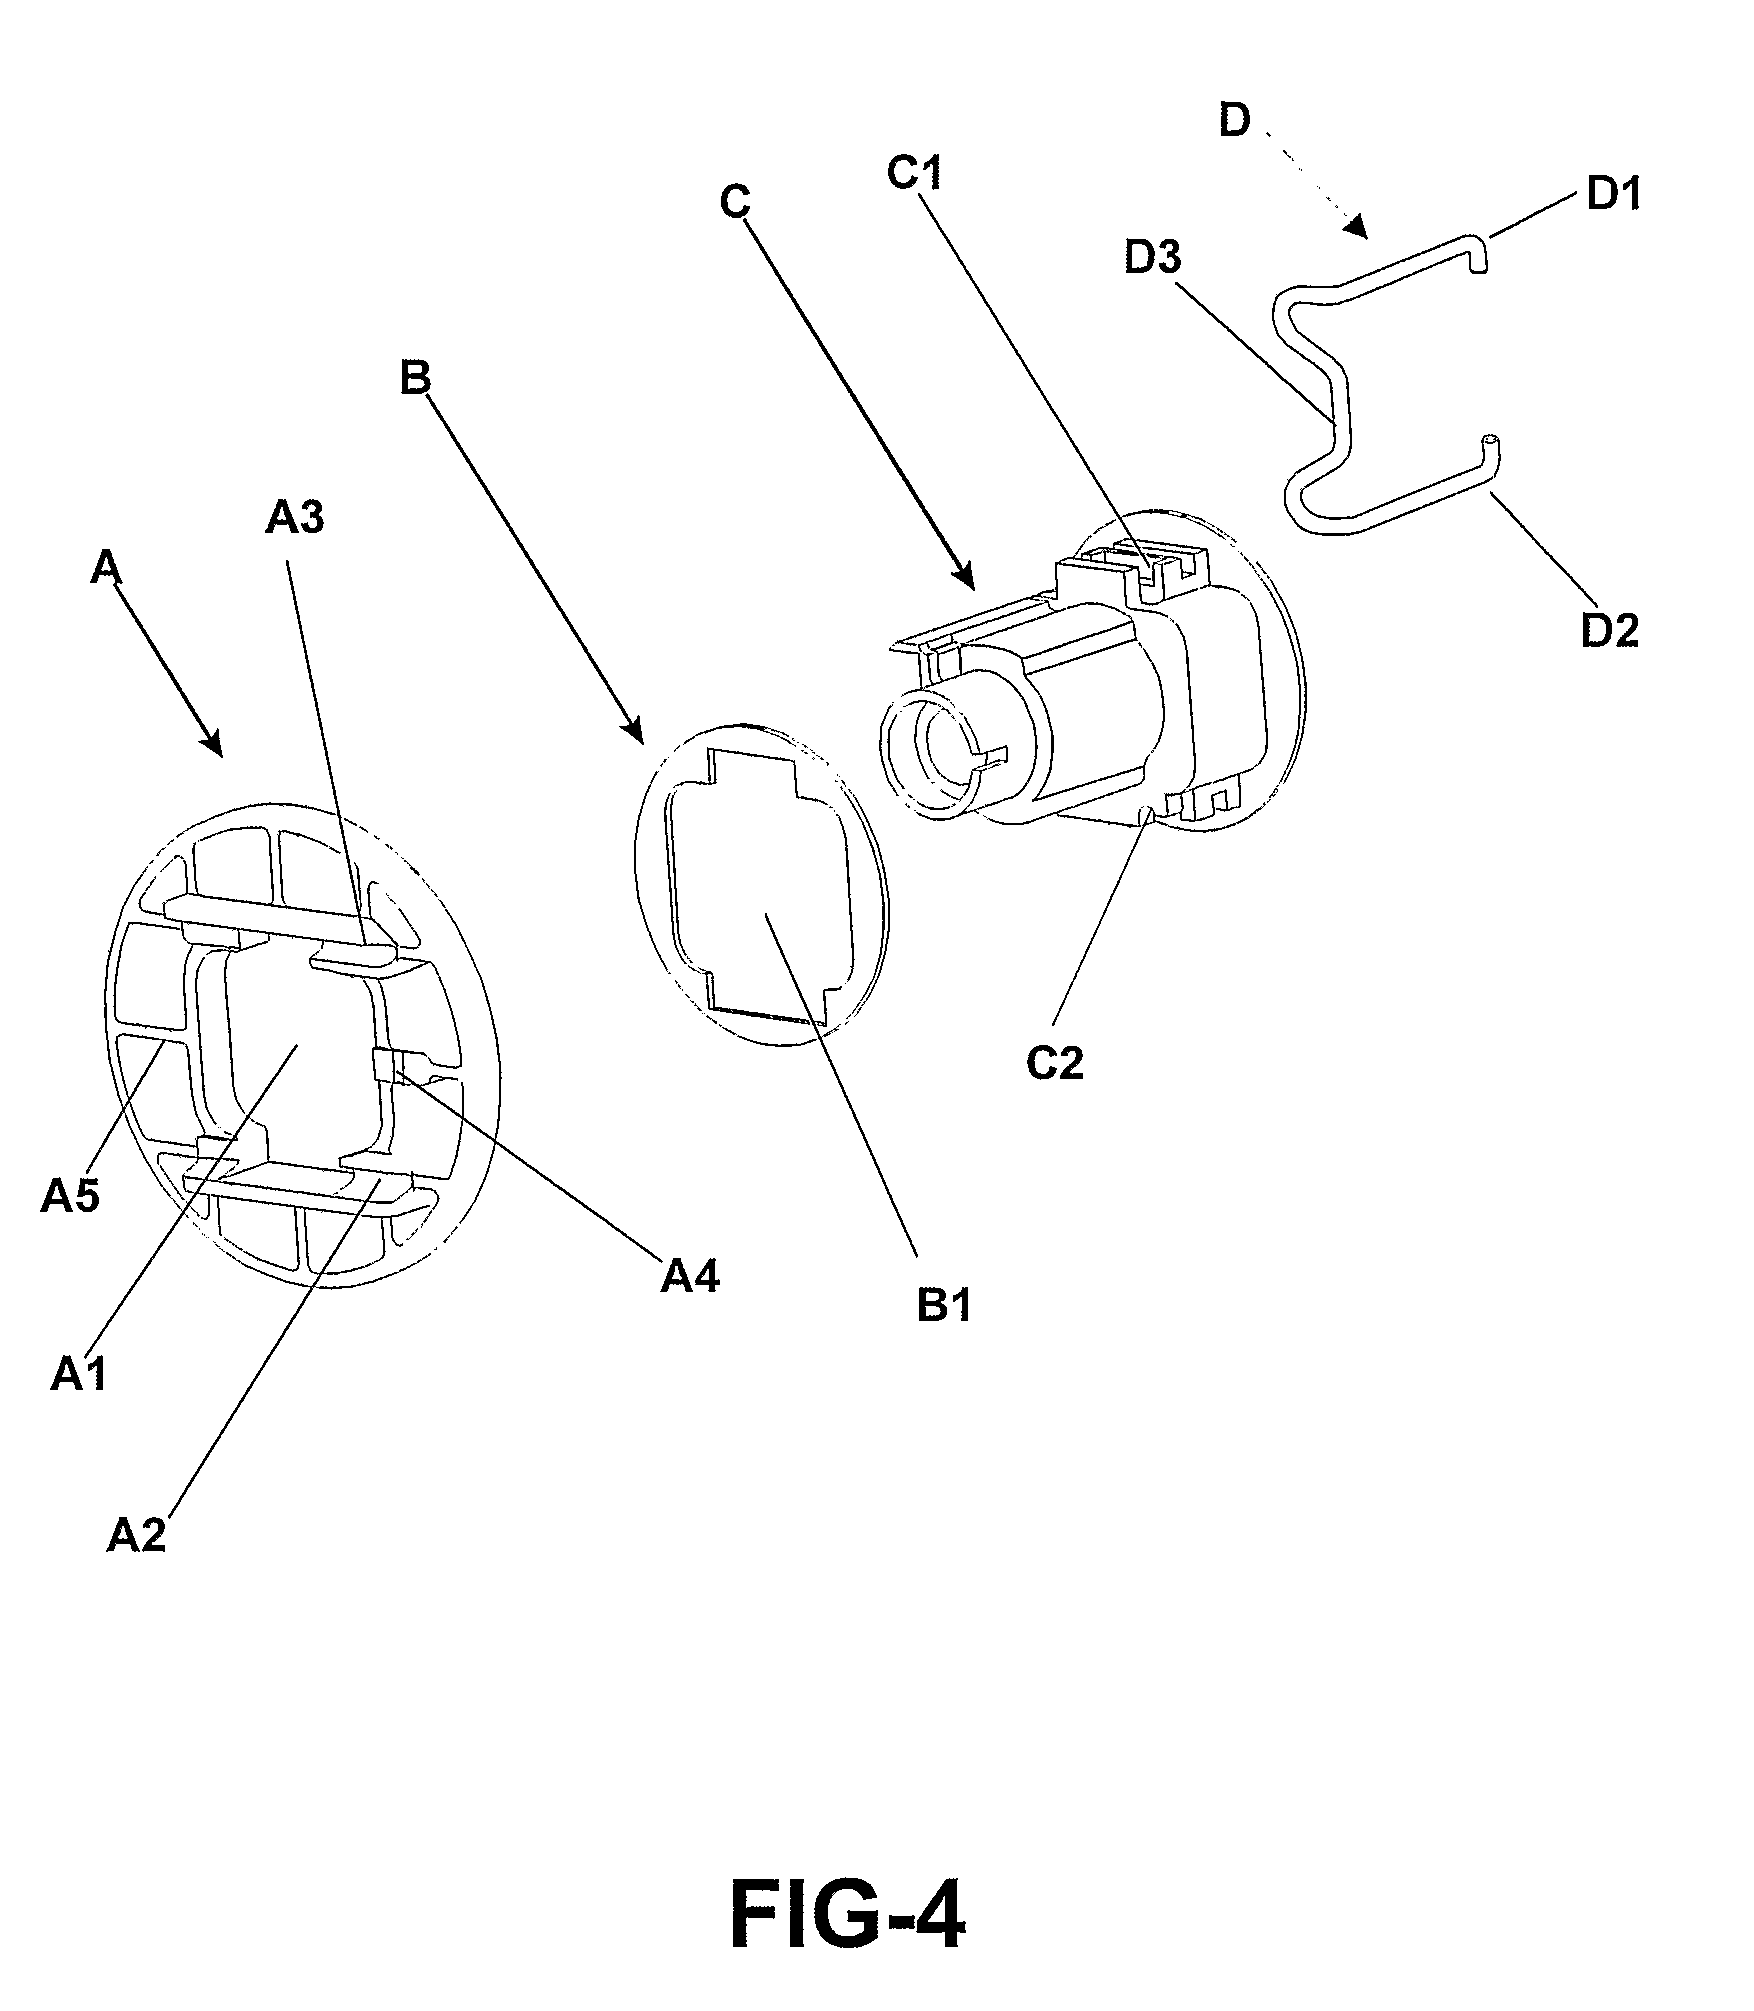 Constructive improvement to an anti-theft lock device applied to automobile trunks